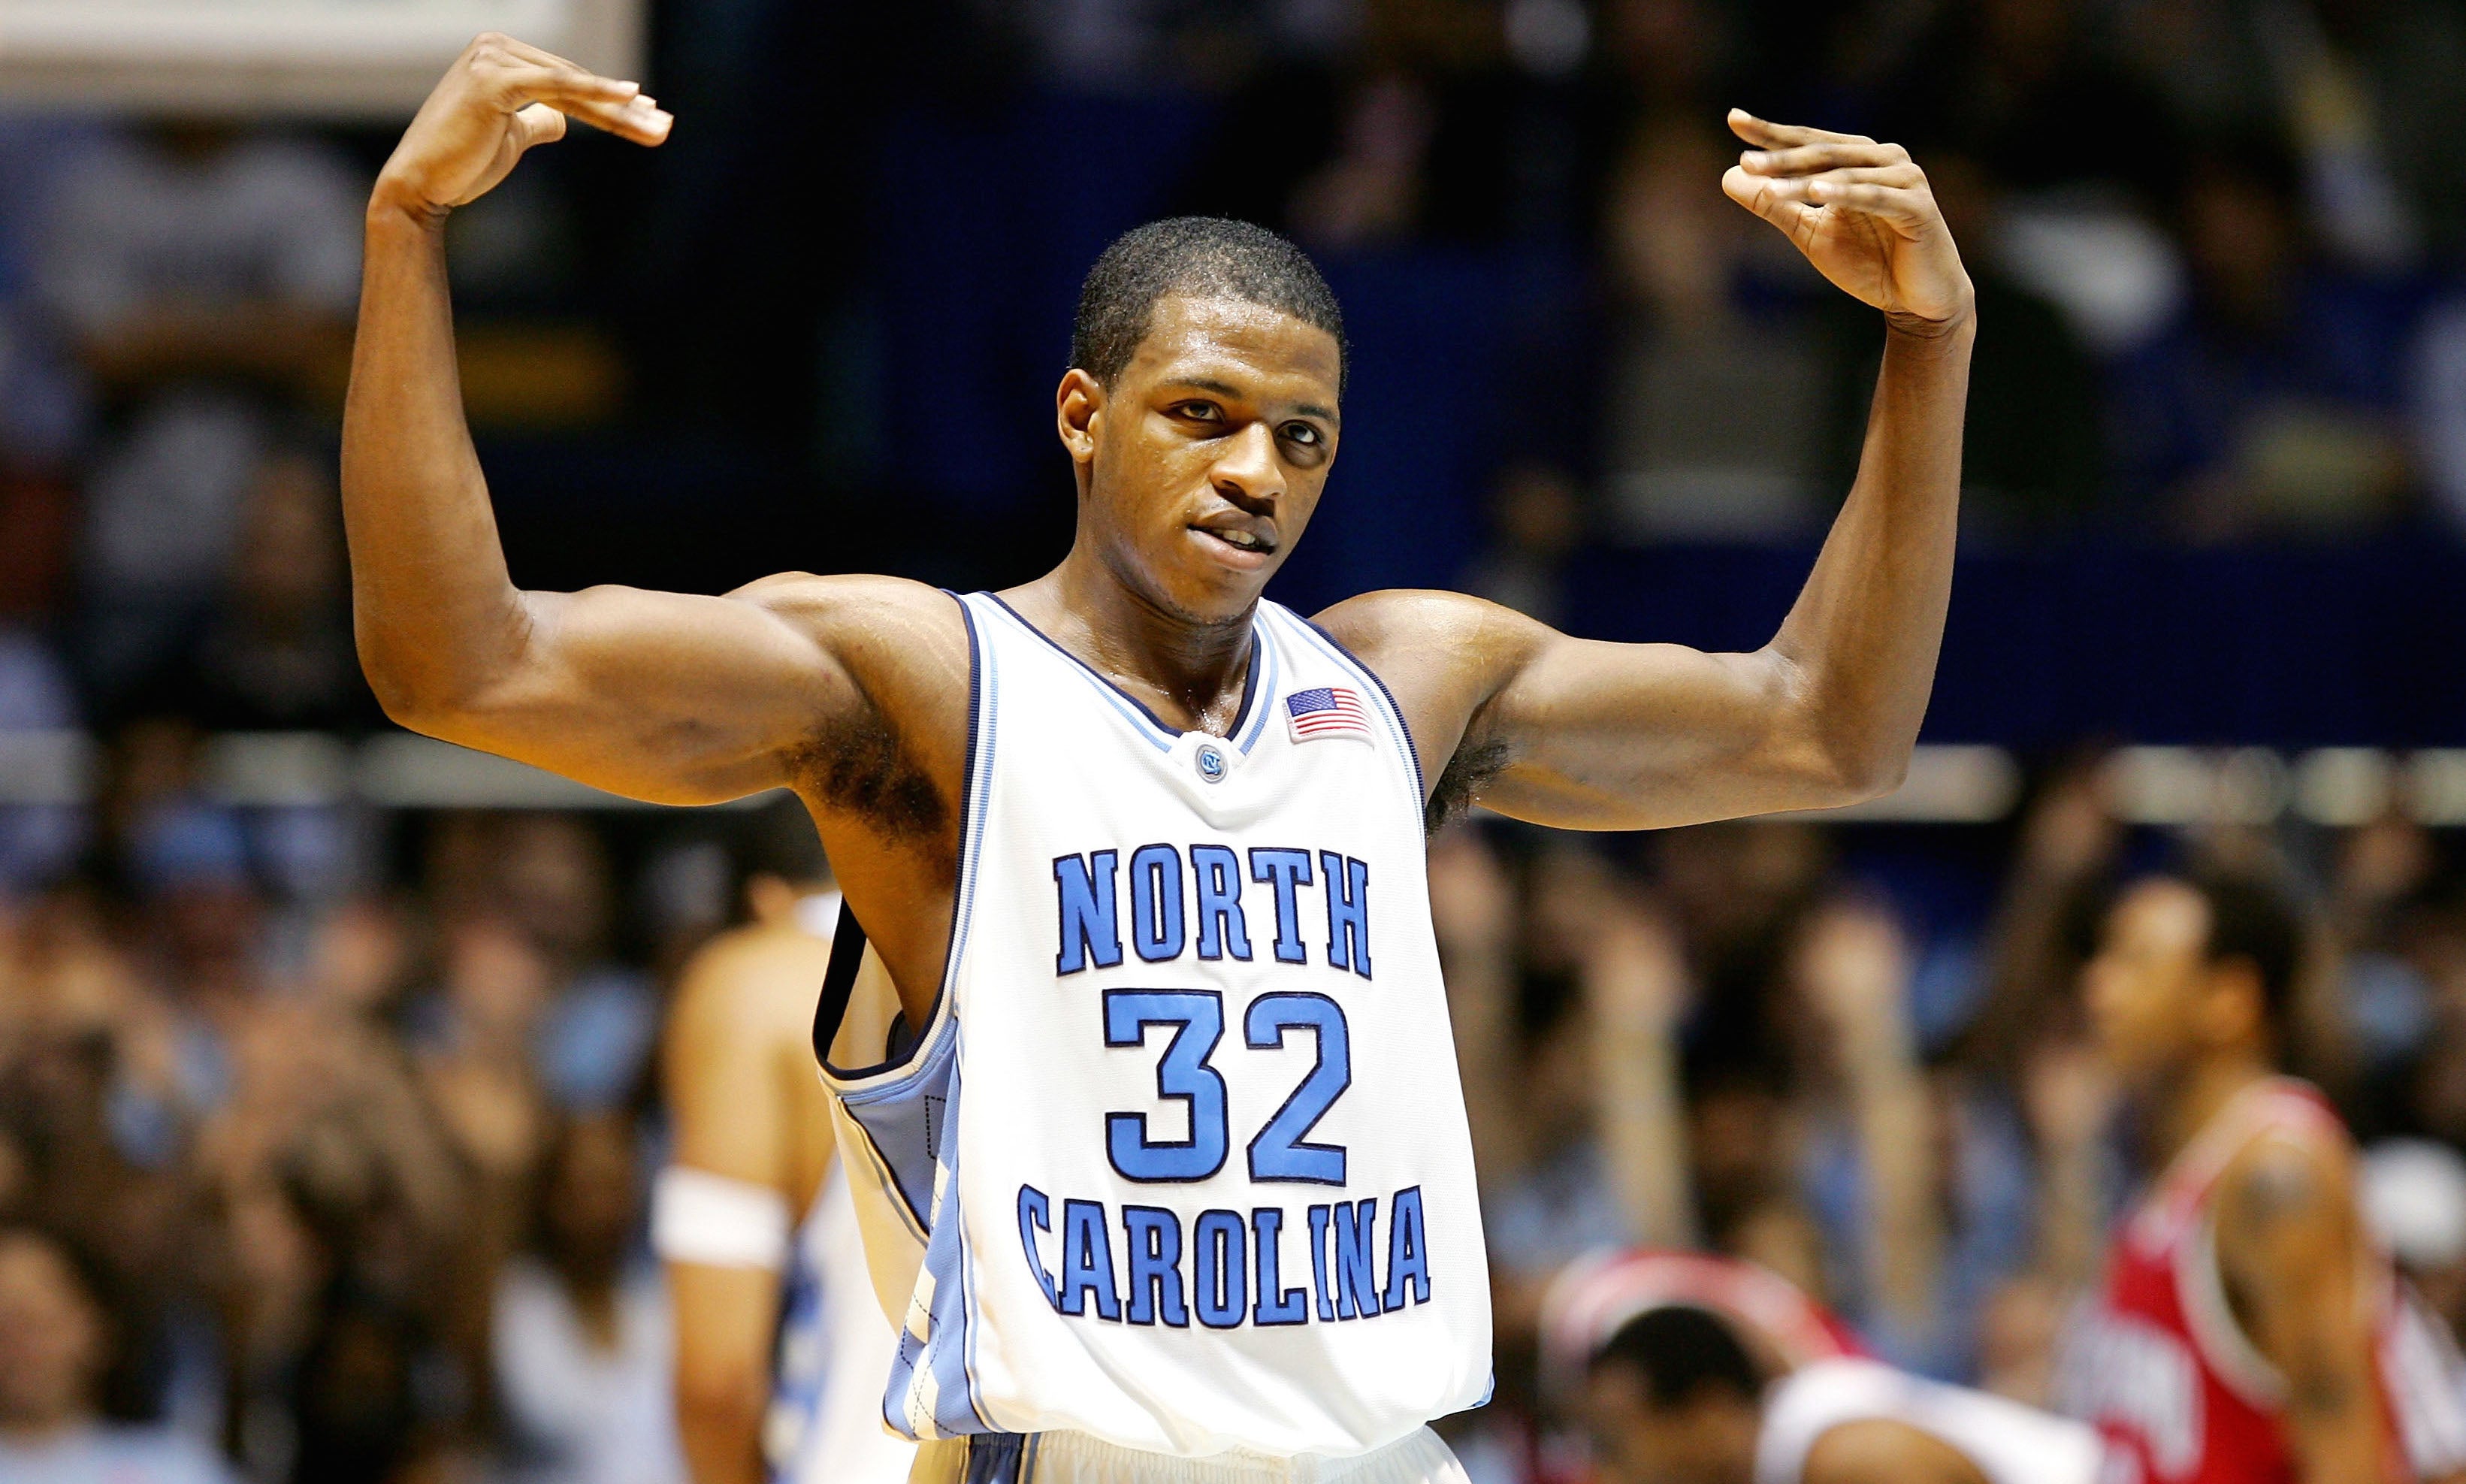 Rashad McCants Made The Dean's List At UNC Without Attending Classes